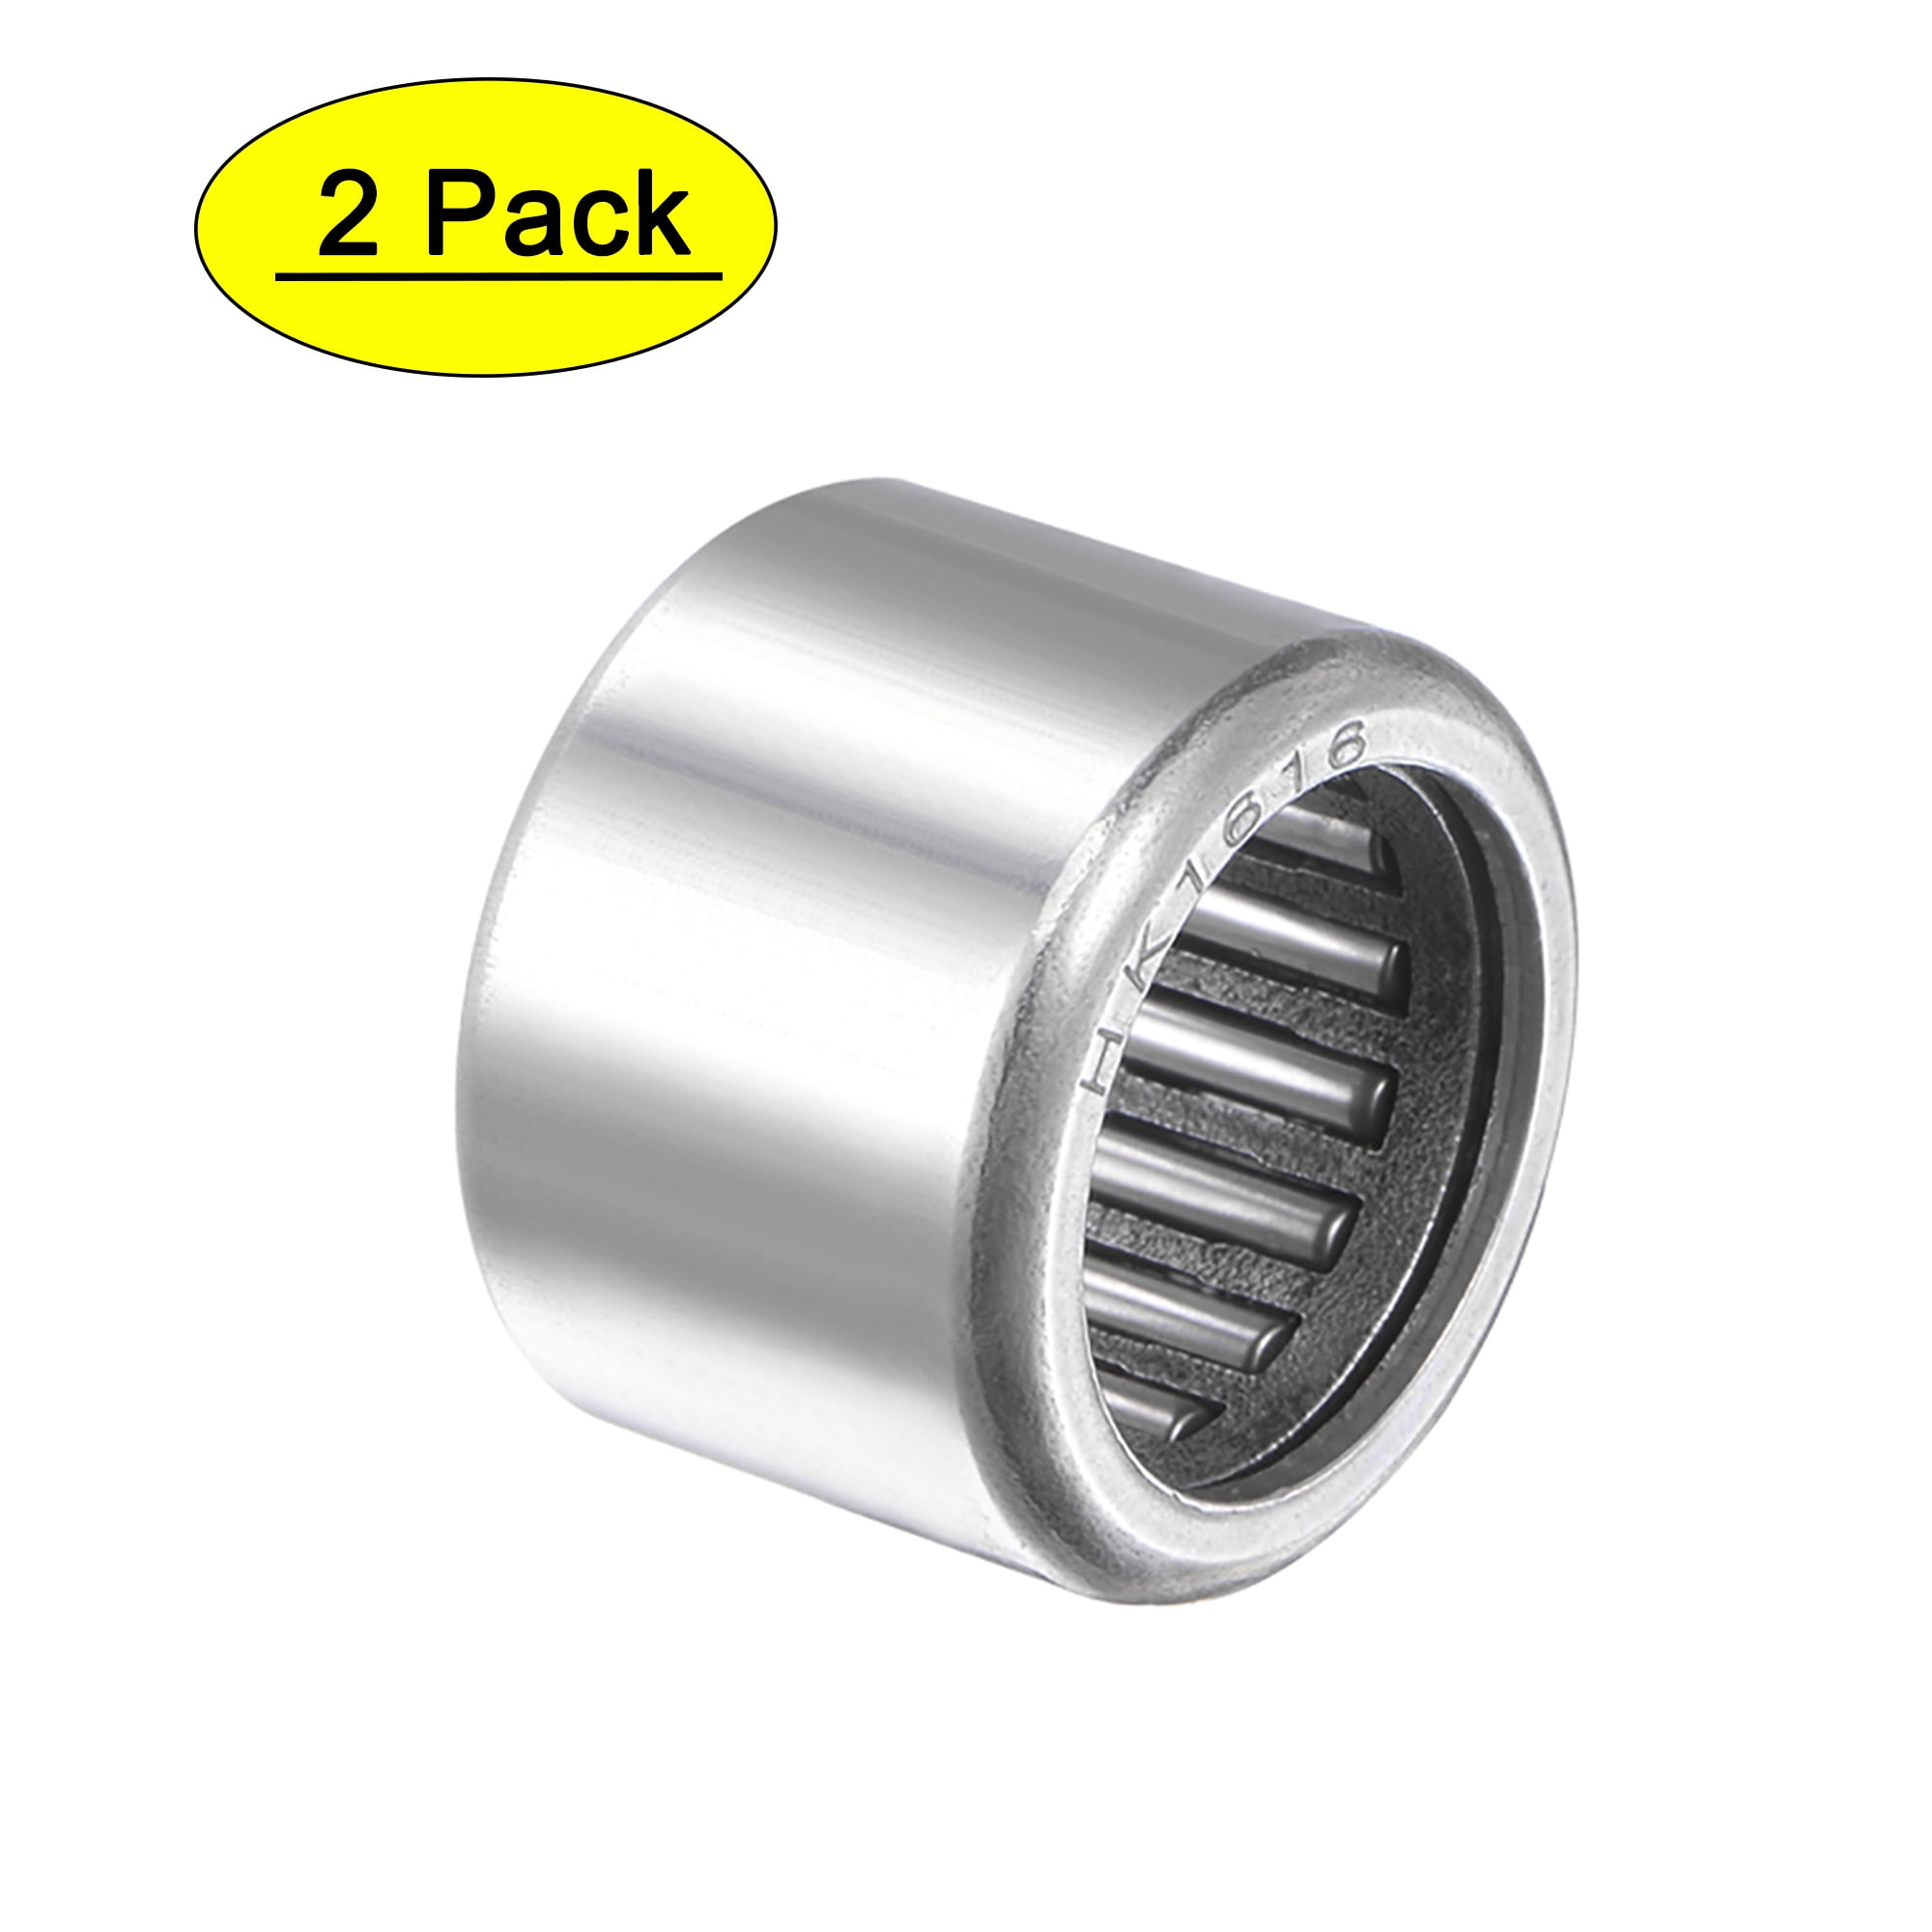 1 x HK1712 DRAWN CUP NEEDLE ROLLER BEARING ID 17mm OD 23mm LENGTH 12mm 